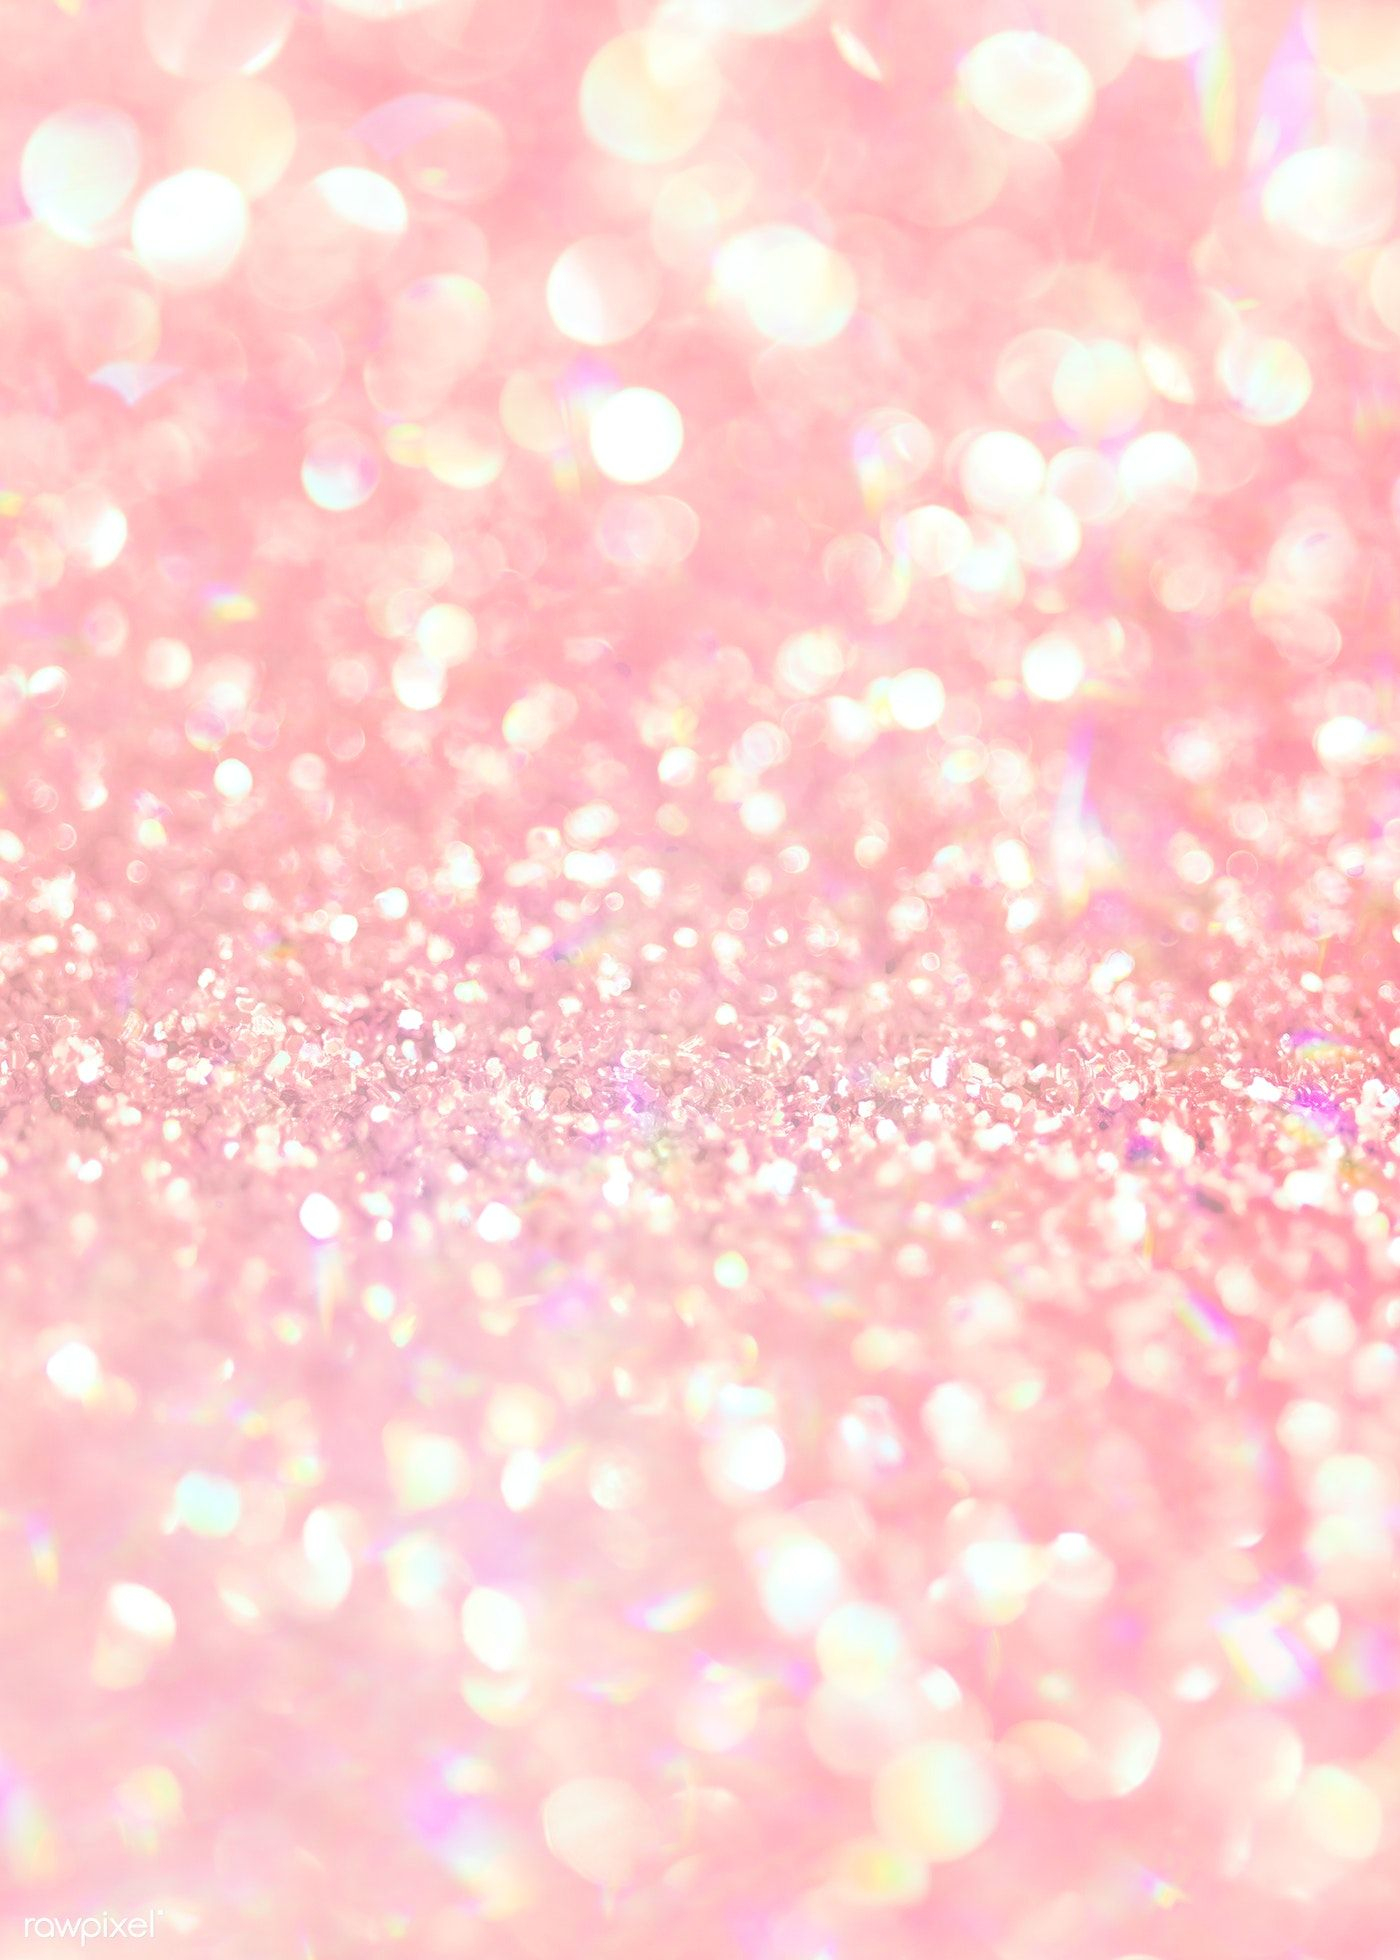 1400x1960 Pink sparkles bokeh background invitation card | premium image by / manotang | Pink sparkle background, Pink sparkle wallpaper, Sparkles background